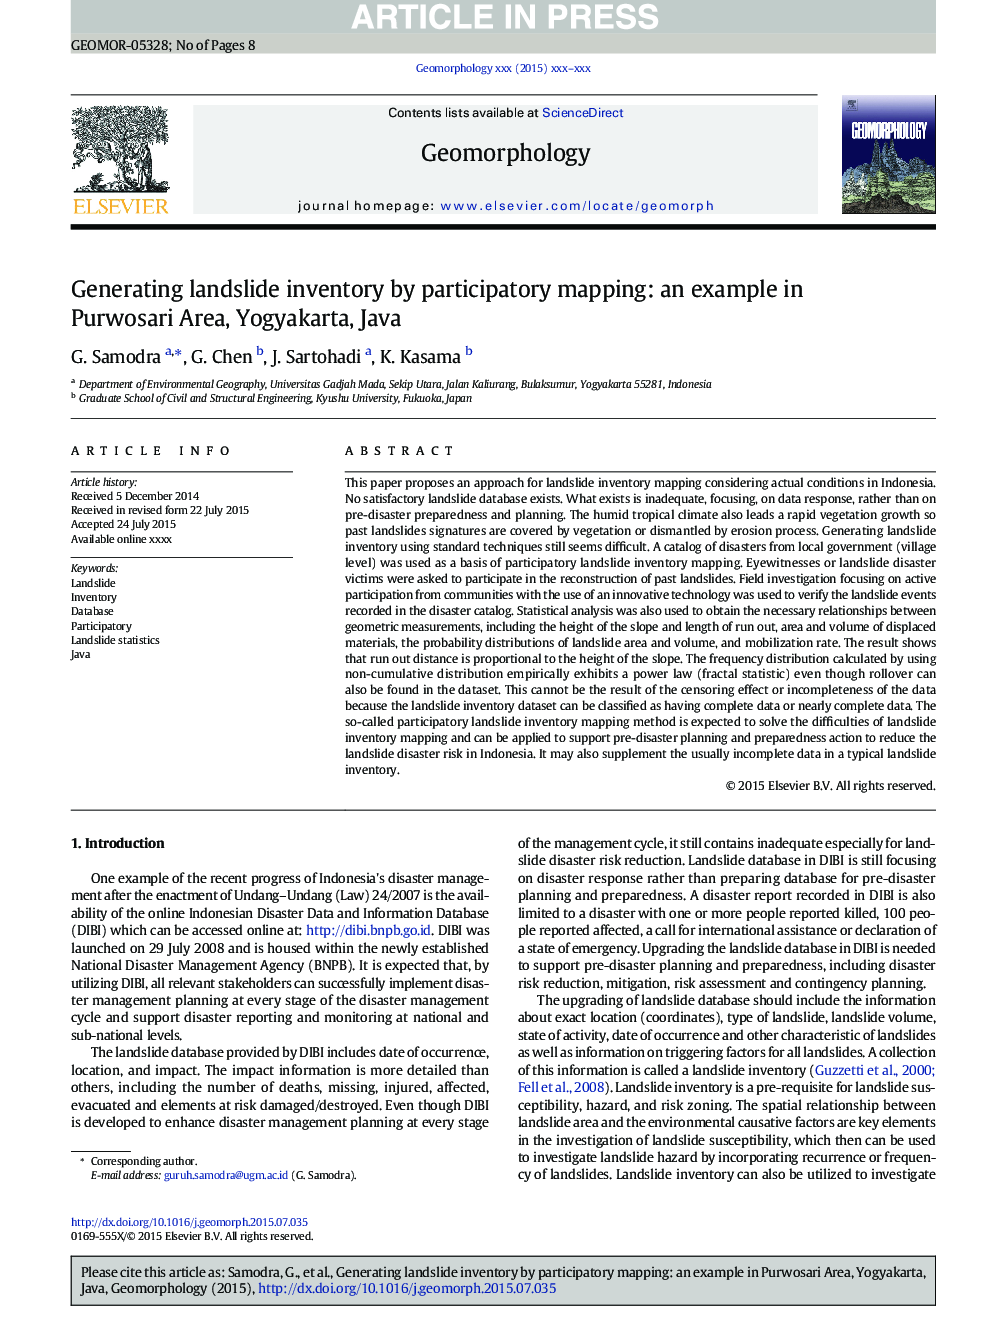 Generating landslide inventory by participatory mapping: an example in Purwosari Area, Yogyakarta, Java